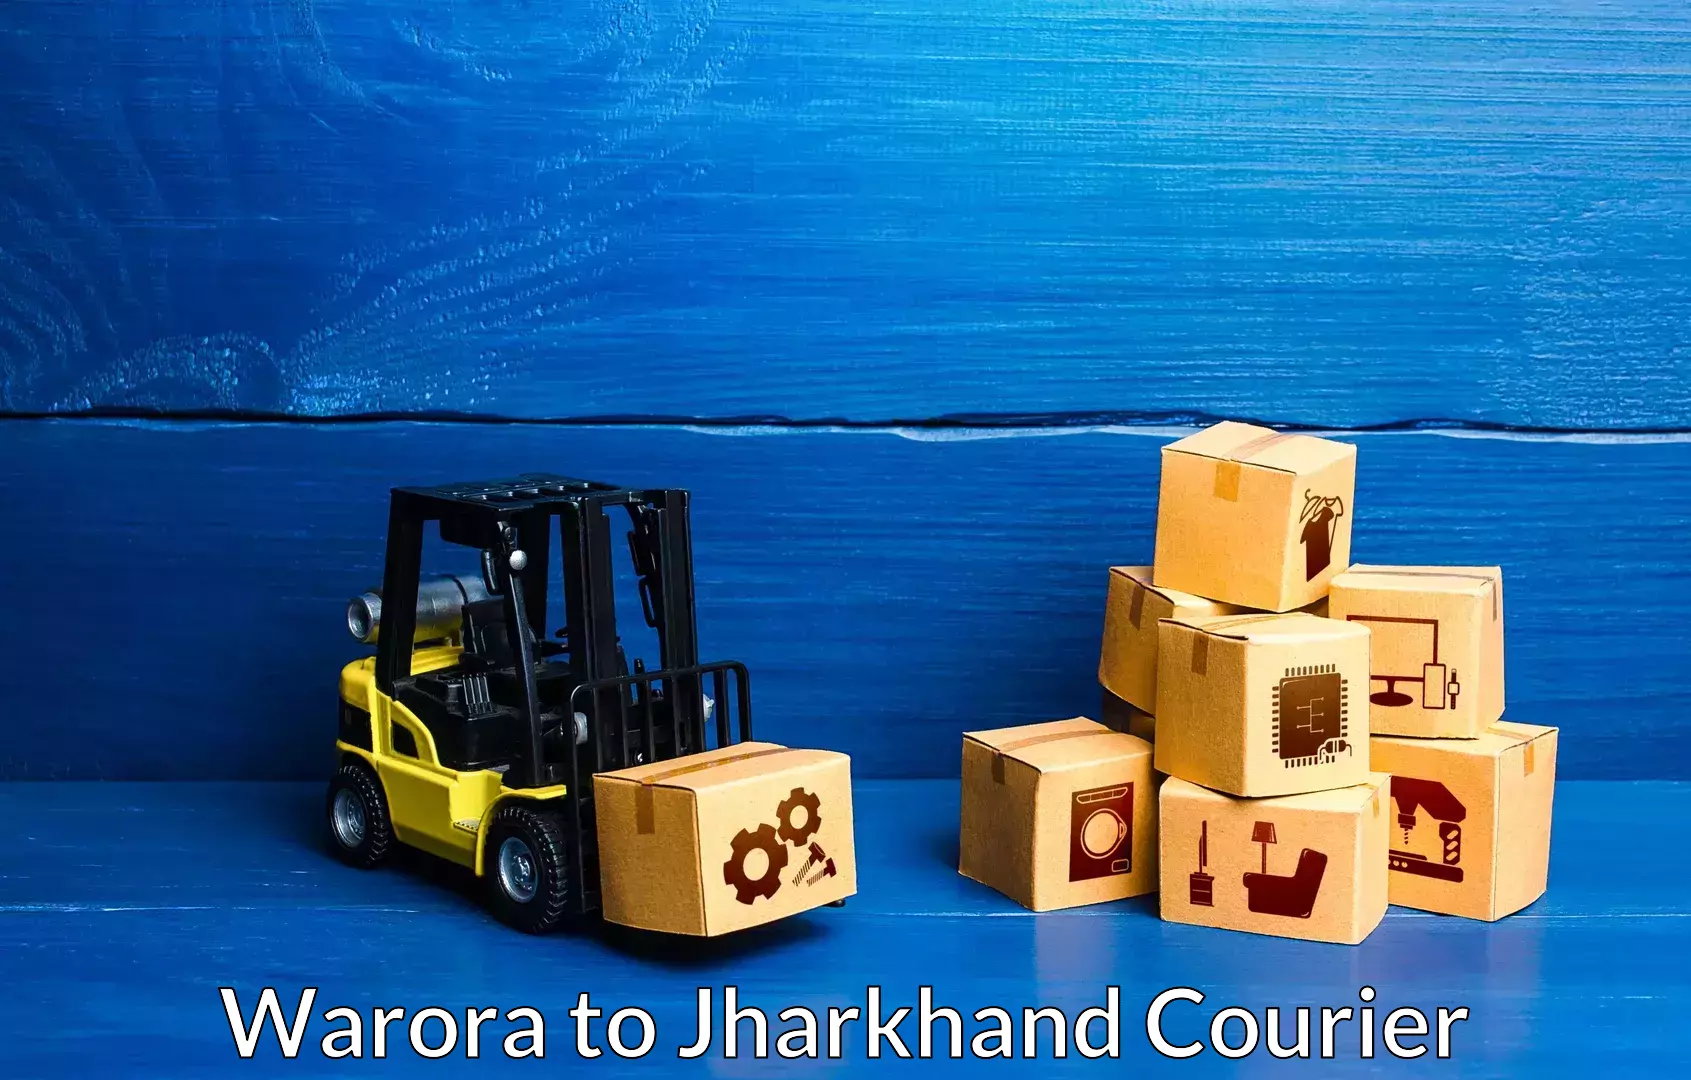 High-quality moving services in Warora to Peterbar